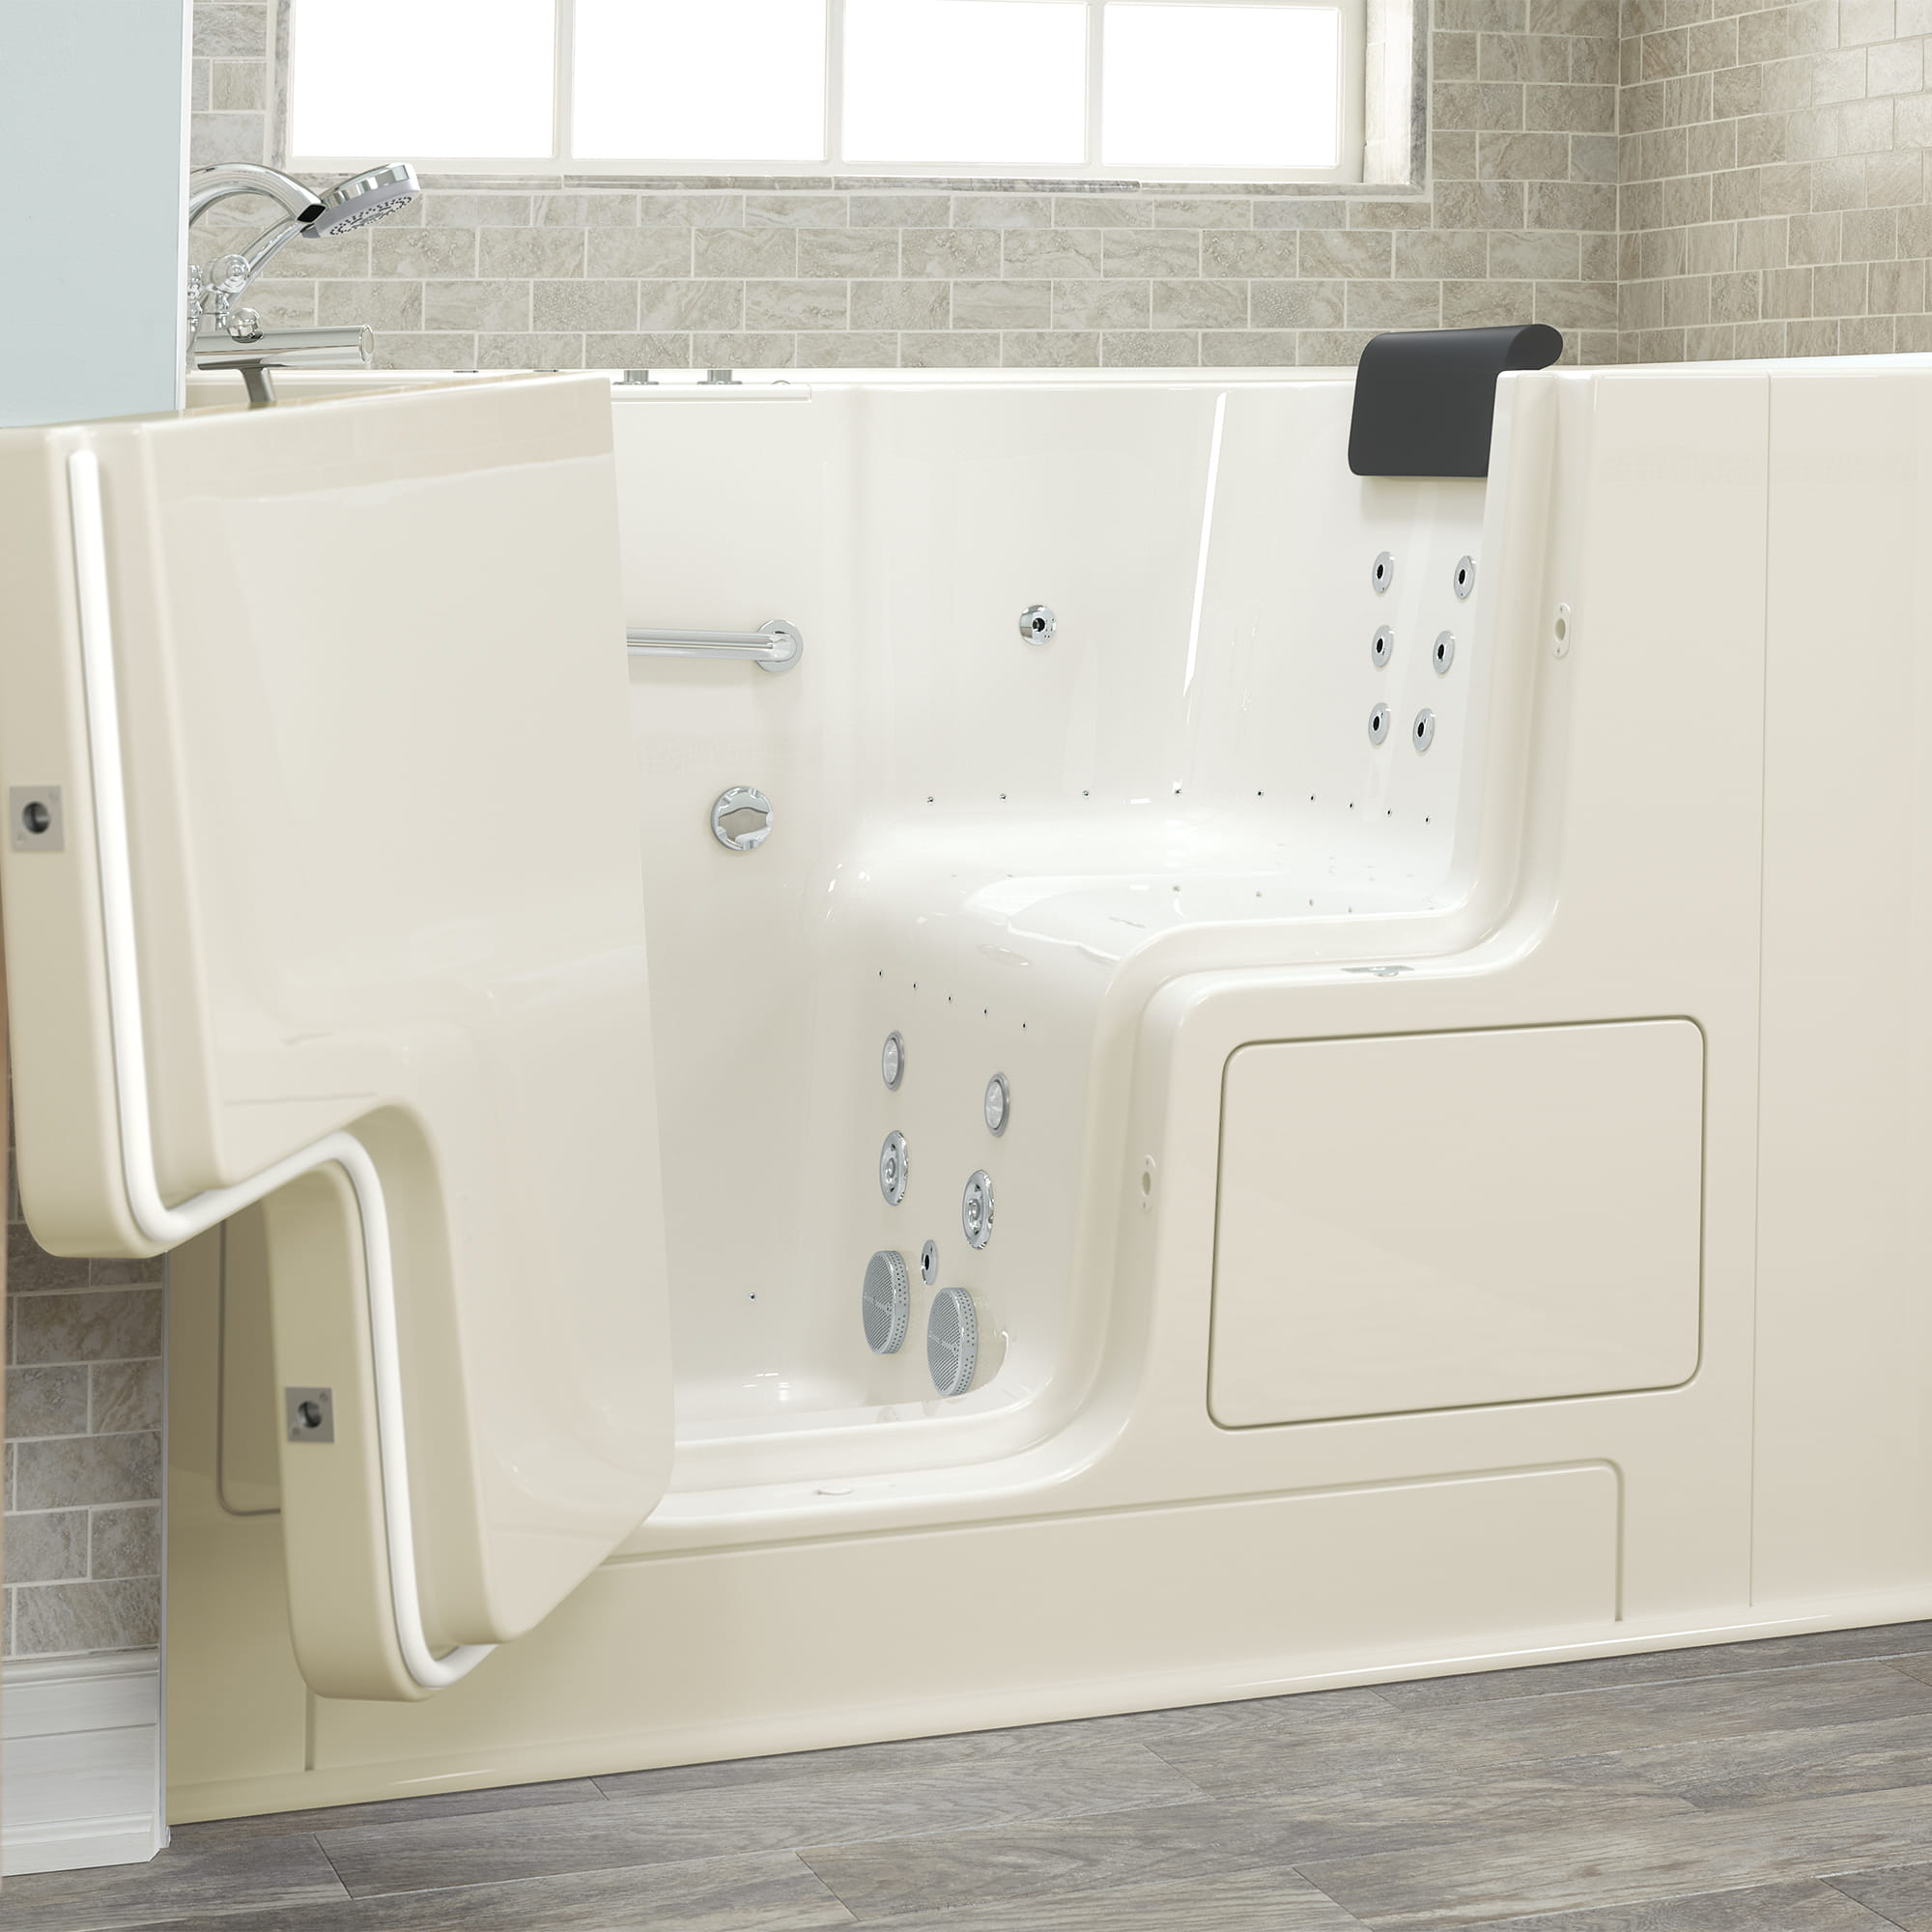 Gelcoat Premium Series 32 x 52  Inch Walk in Tub With Combination Air Spa and Whirlpool Systems   Left Hand Drain With Faucet WIB LINEN